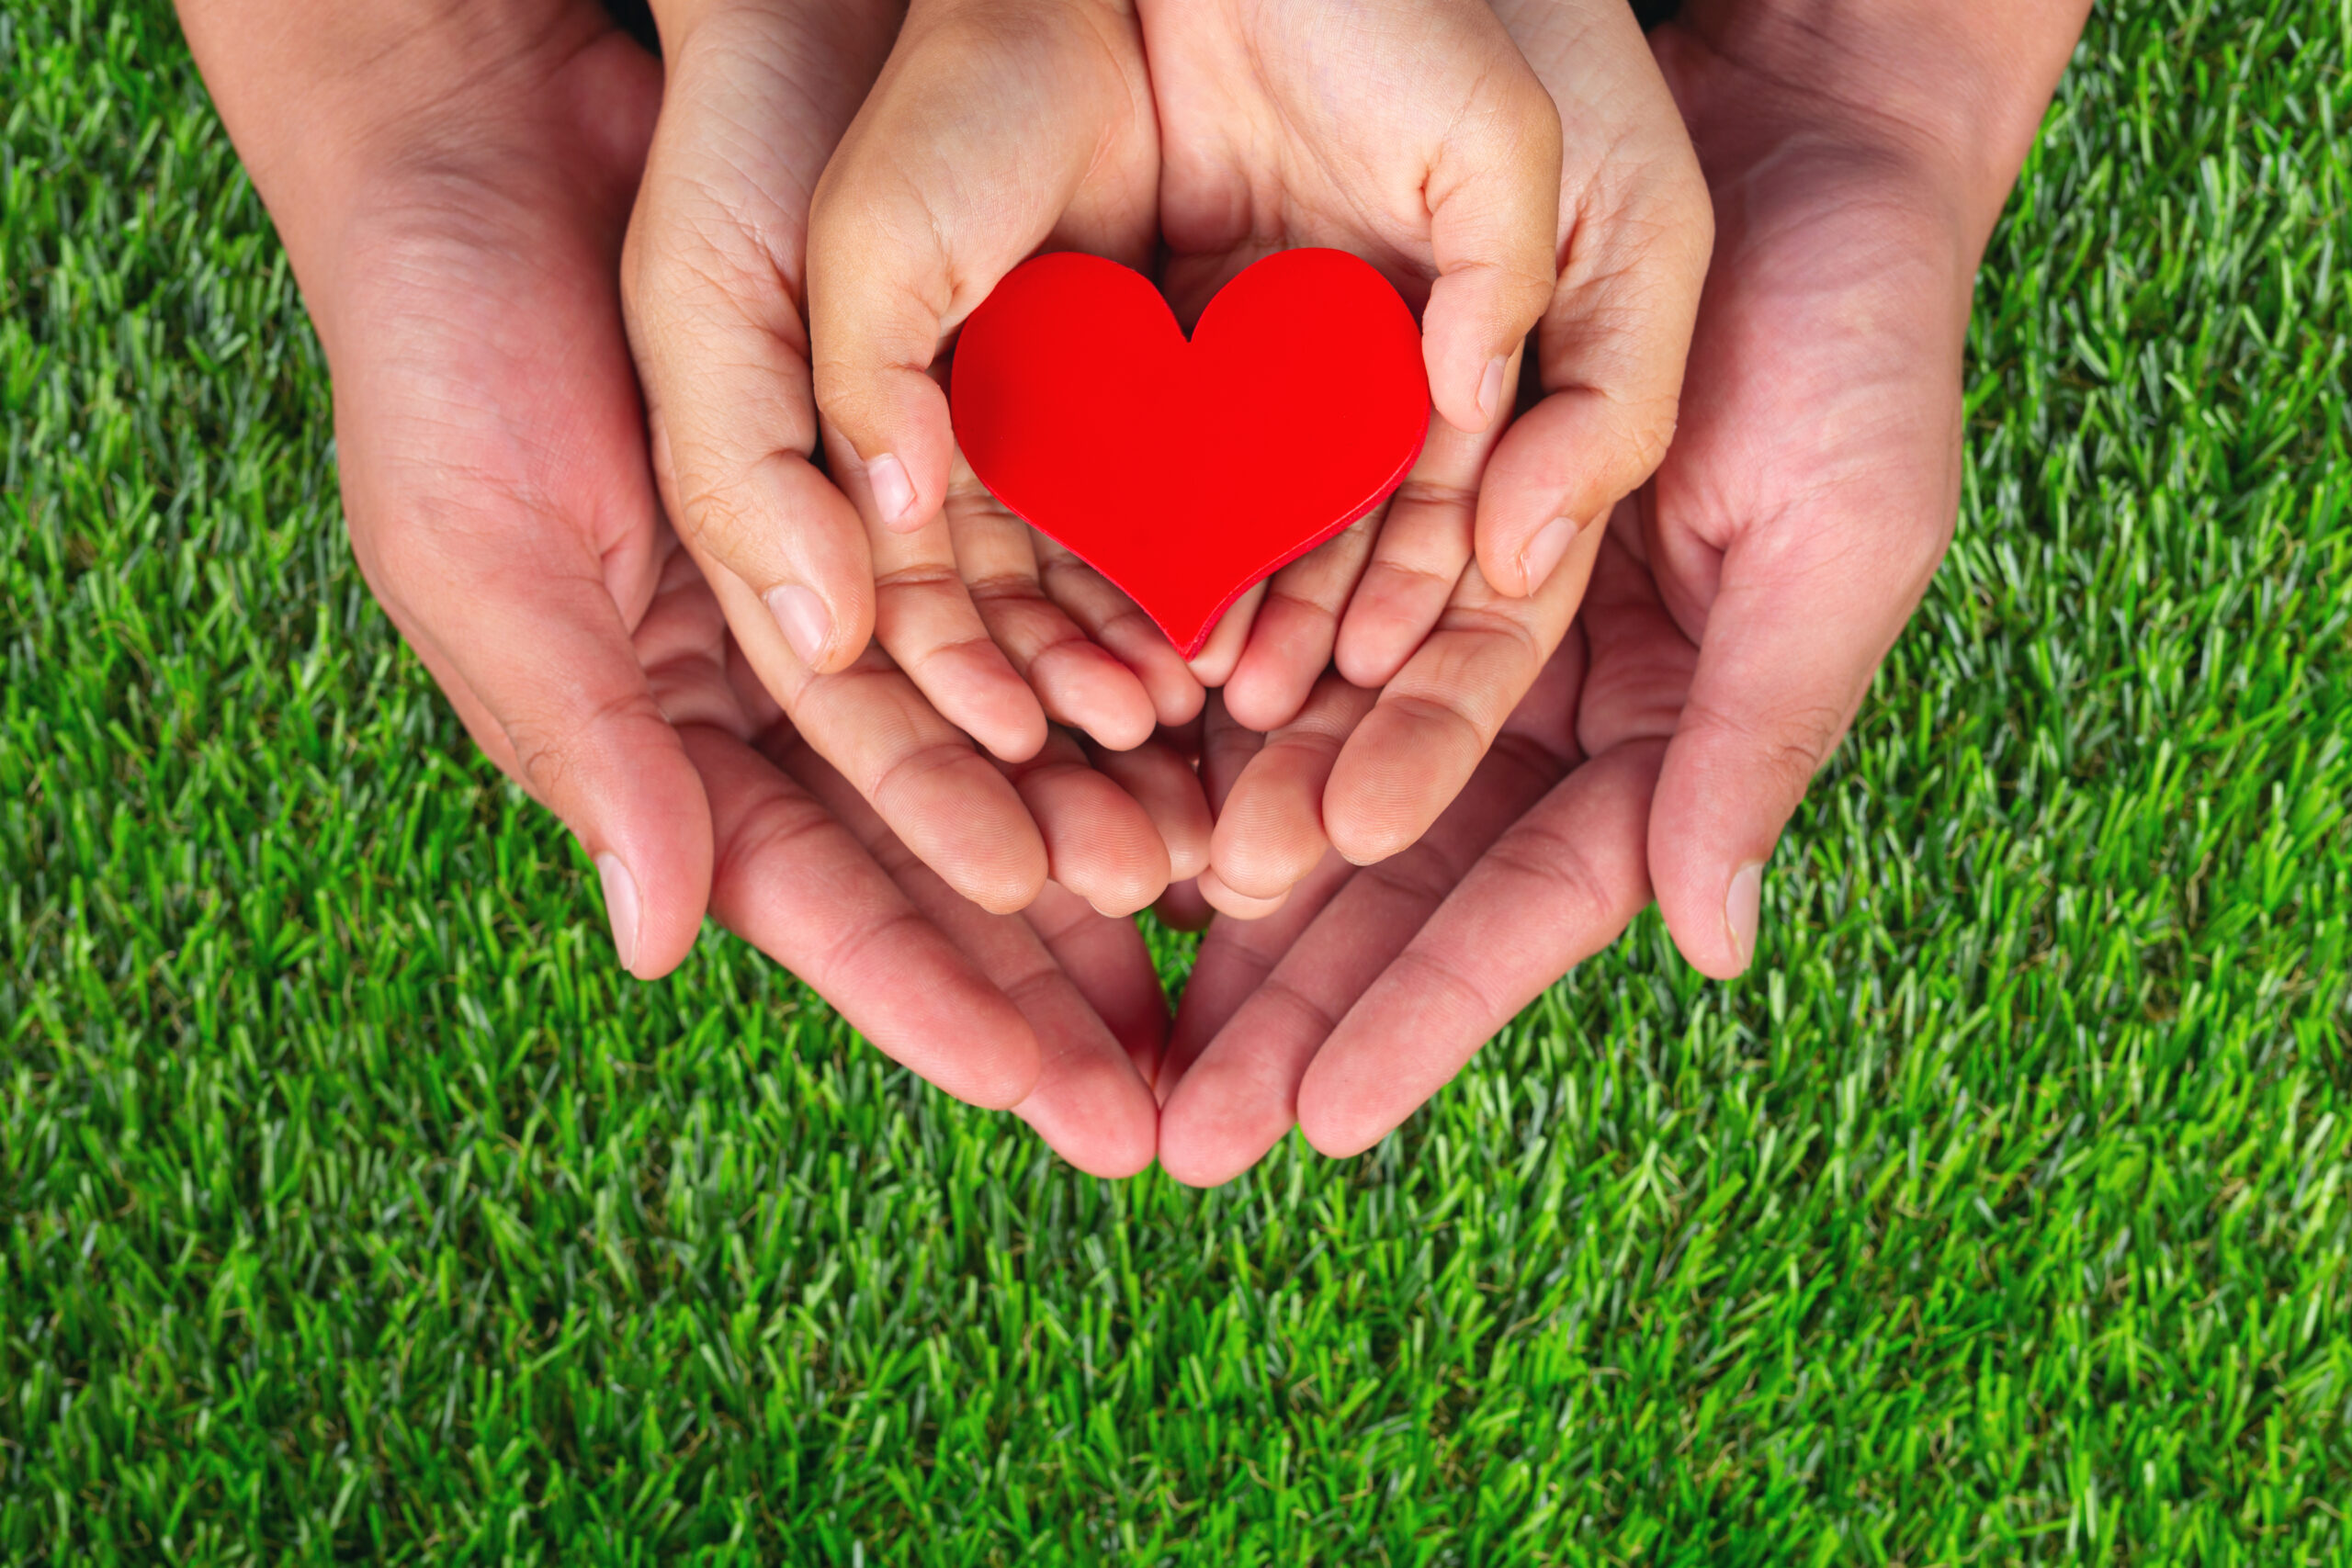 three pairs of hands holding a paper heart, green grass in the background